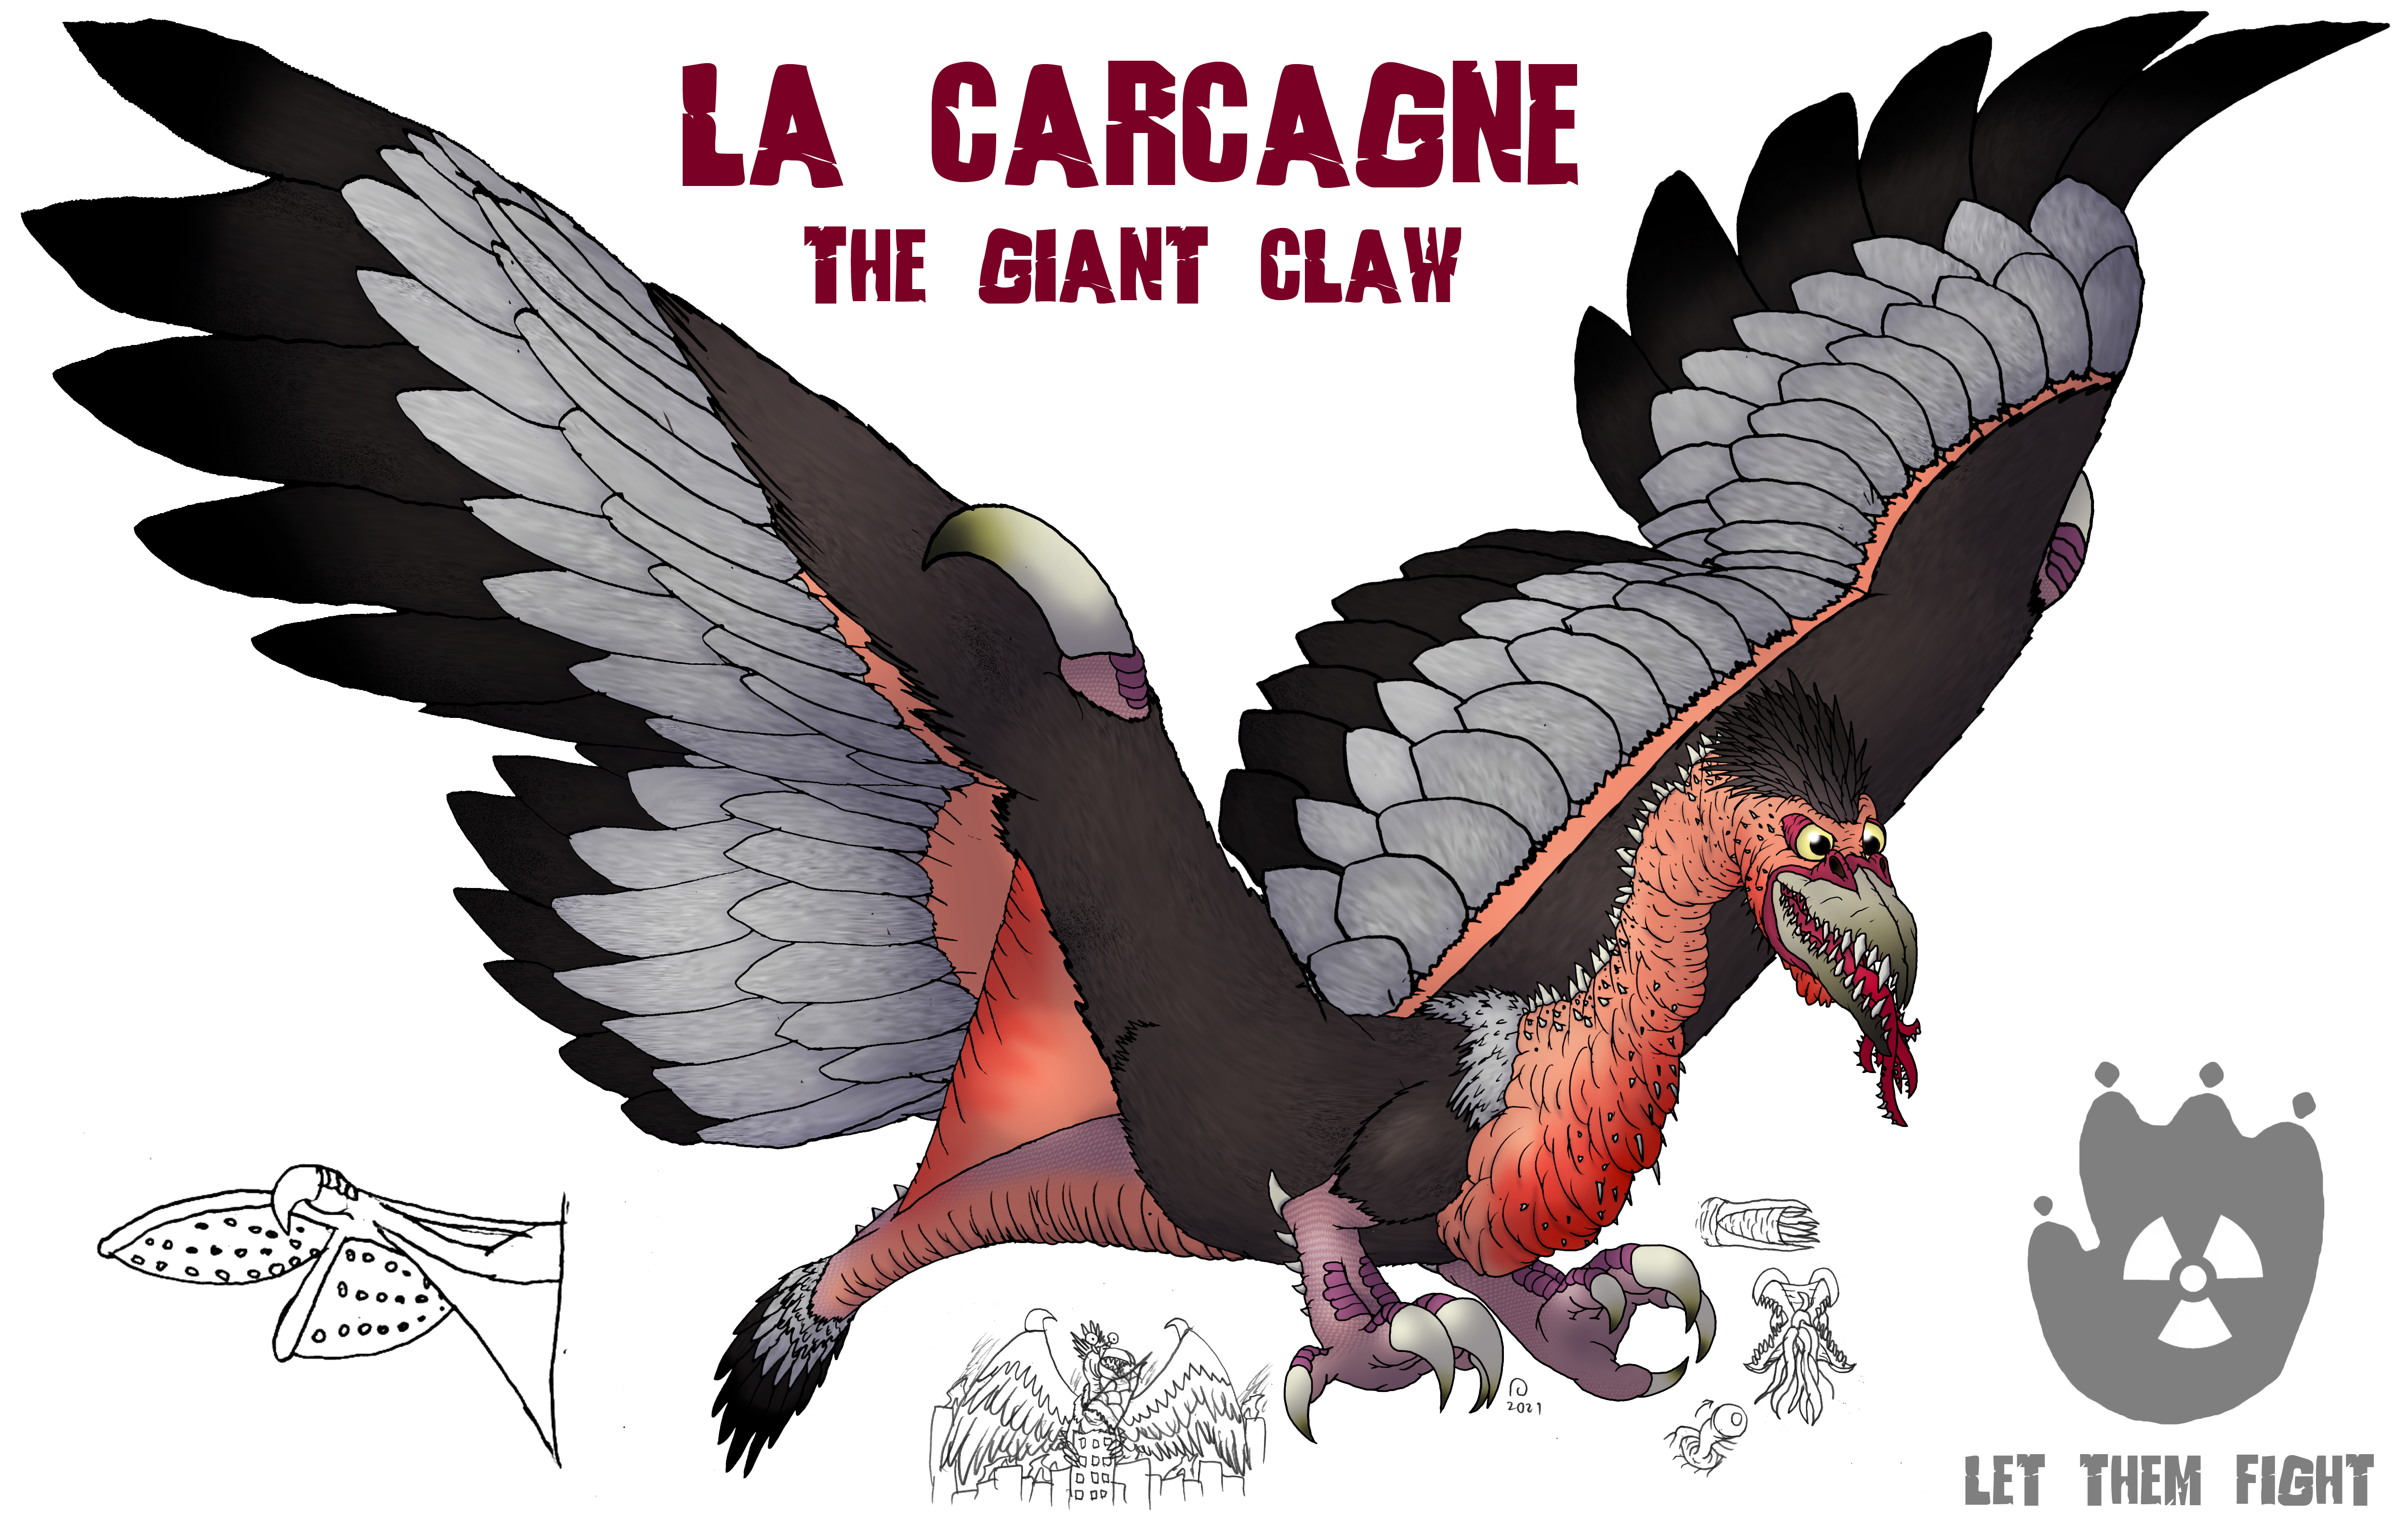 Category:The Giant Claw - Wikimedia Commons